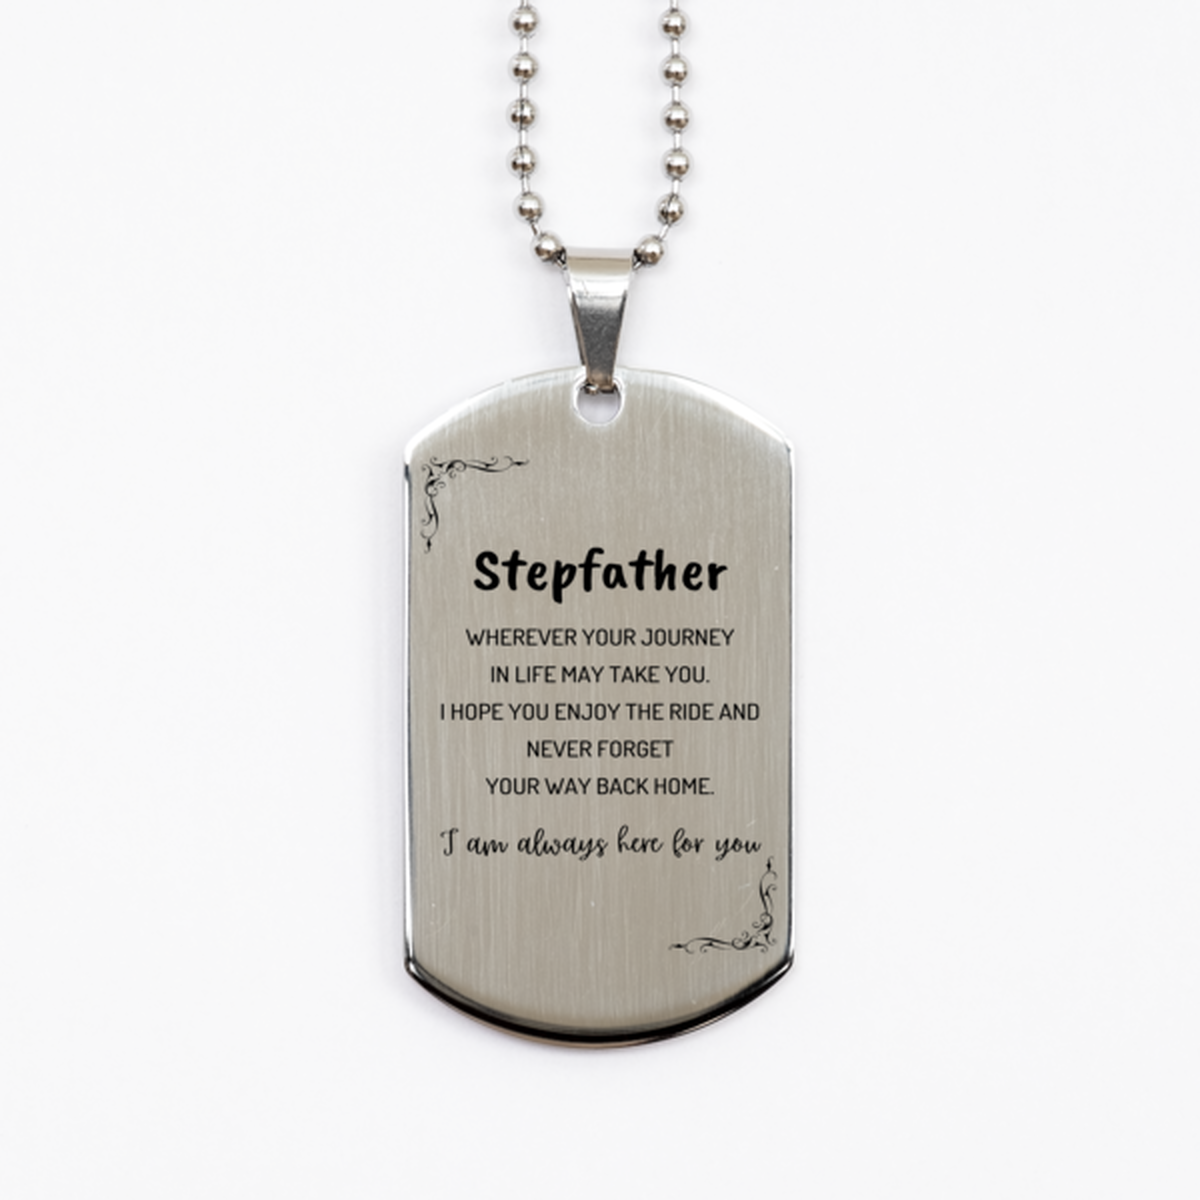 Stepfather wherever your journey in life may take you, I am always here for you Stepfather Silver Dog Tag, Awesome Christmas Gifts For Stepfather, Stepfather Birthday Gifts for Men Women Family Loved One